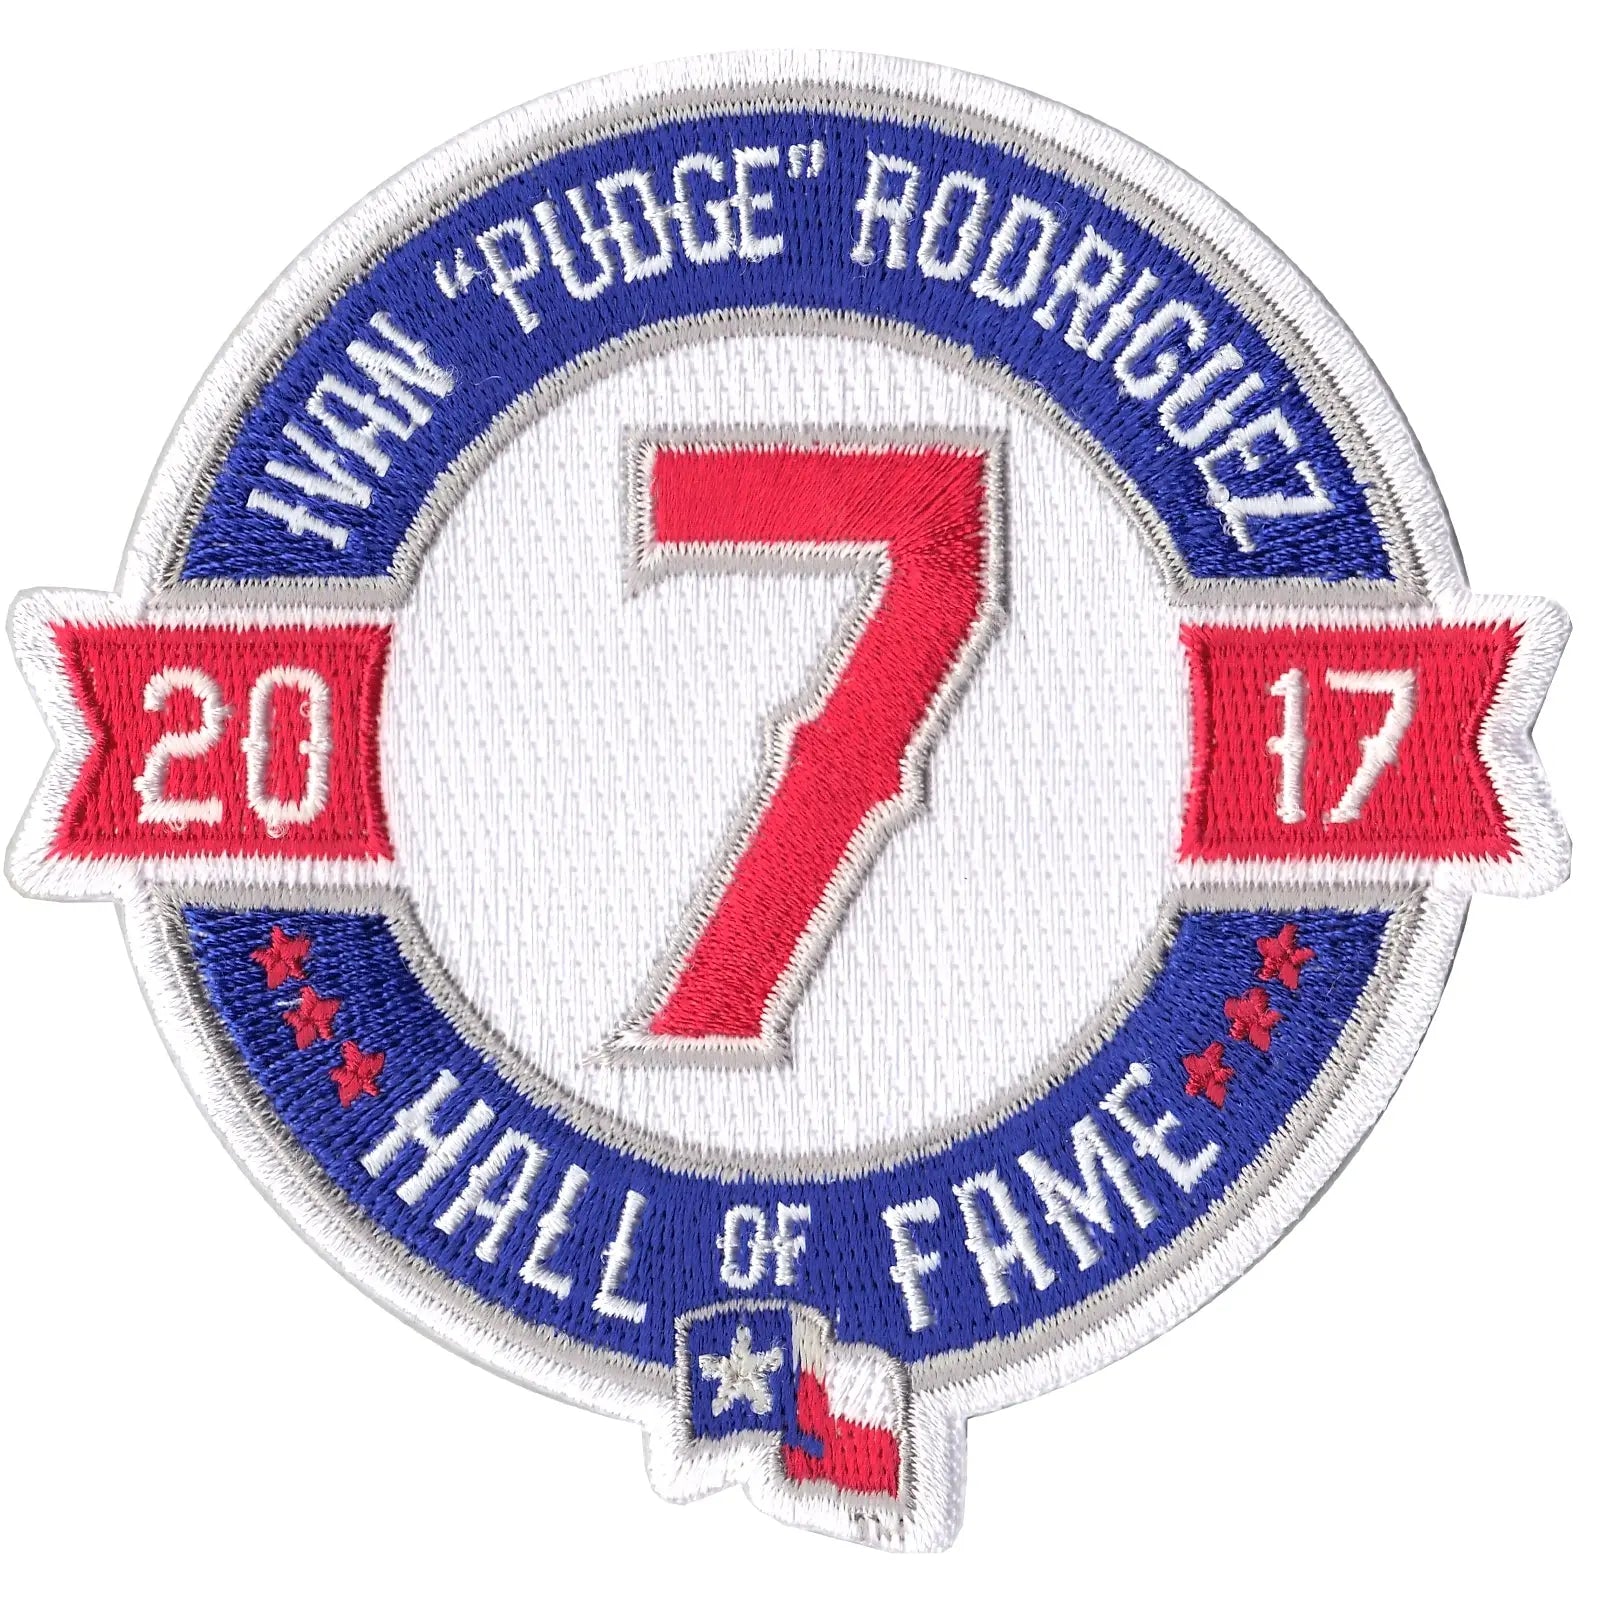 Ivan 'Pudge' Rodriguez 2017 Texas Rangers Hall Of Fame Jersey Patch 